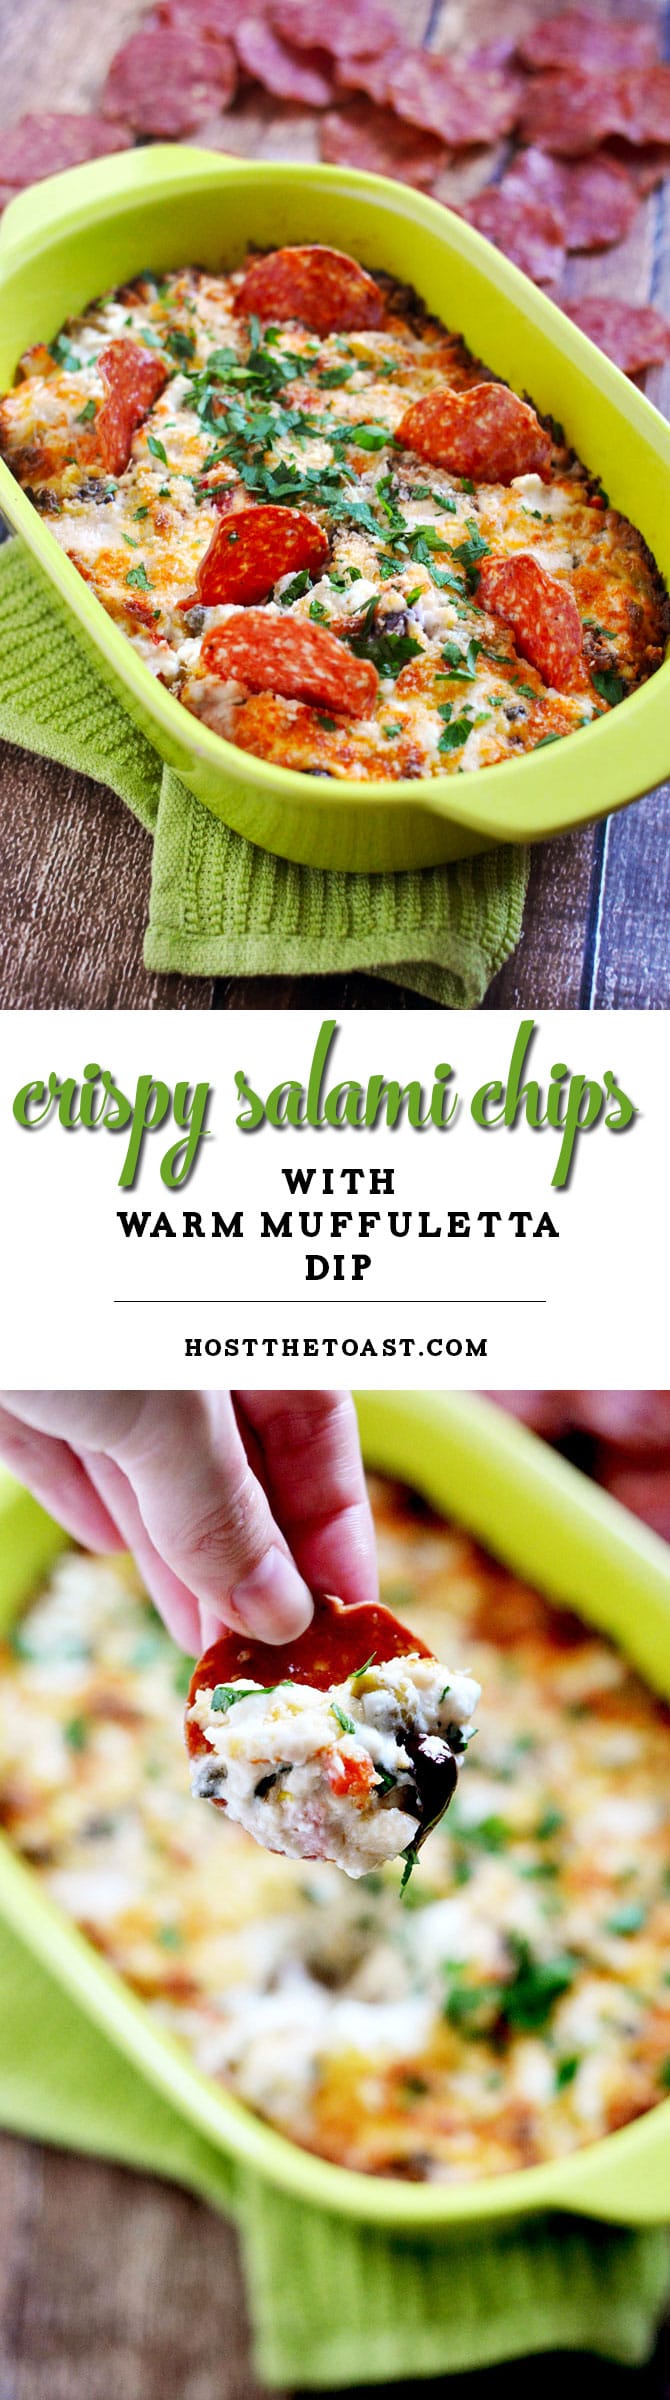 Crispy Salami Chips with Warm Muffuletta Dip. Crunchy baked genoa salami is perfect for scooping this cheesy, tangy dip. | hostthetoast.com